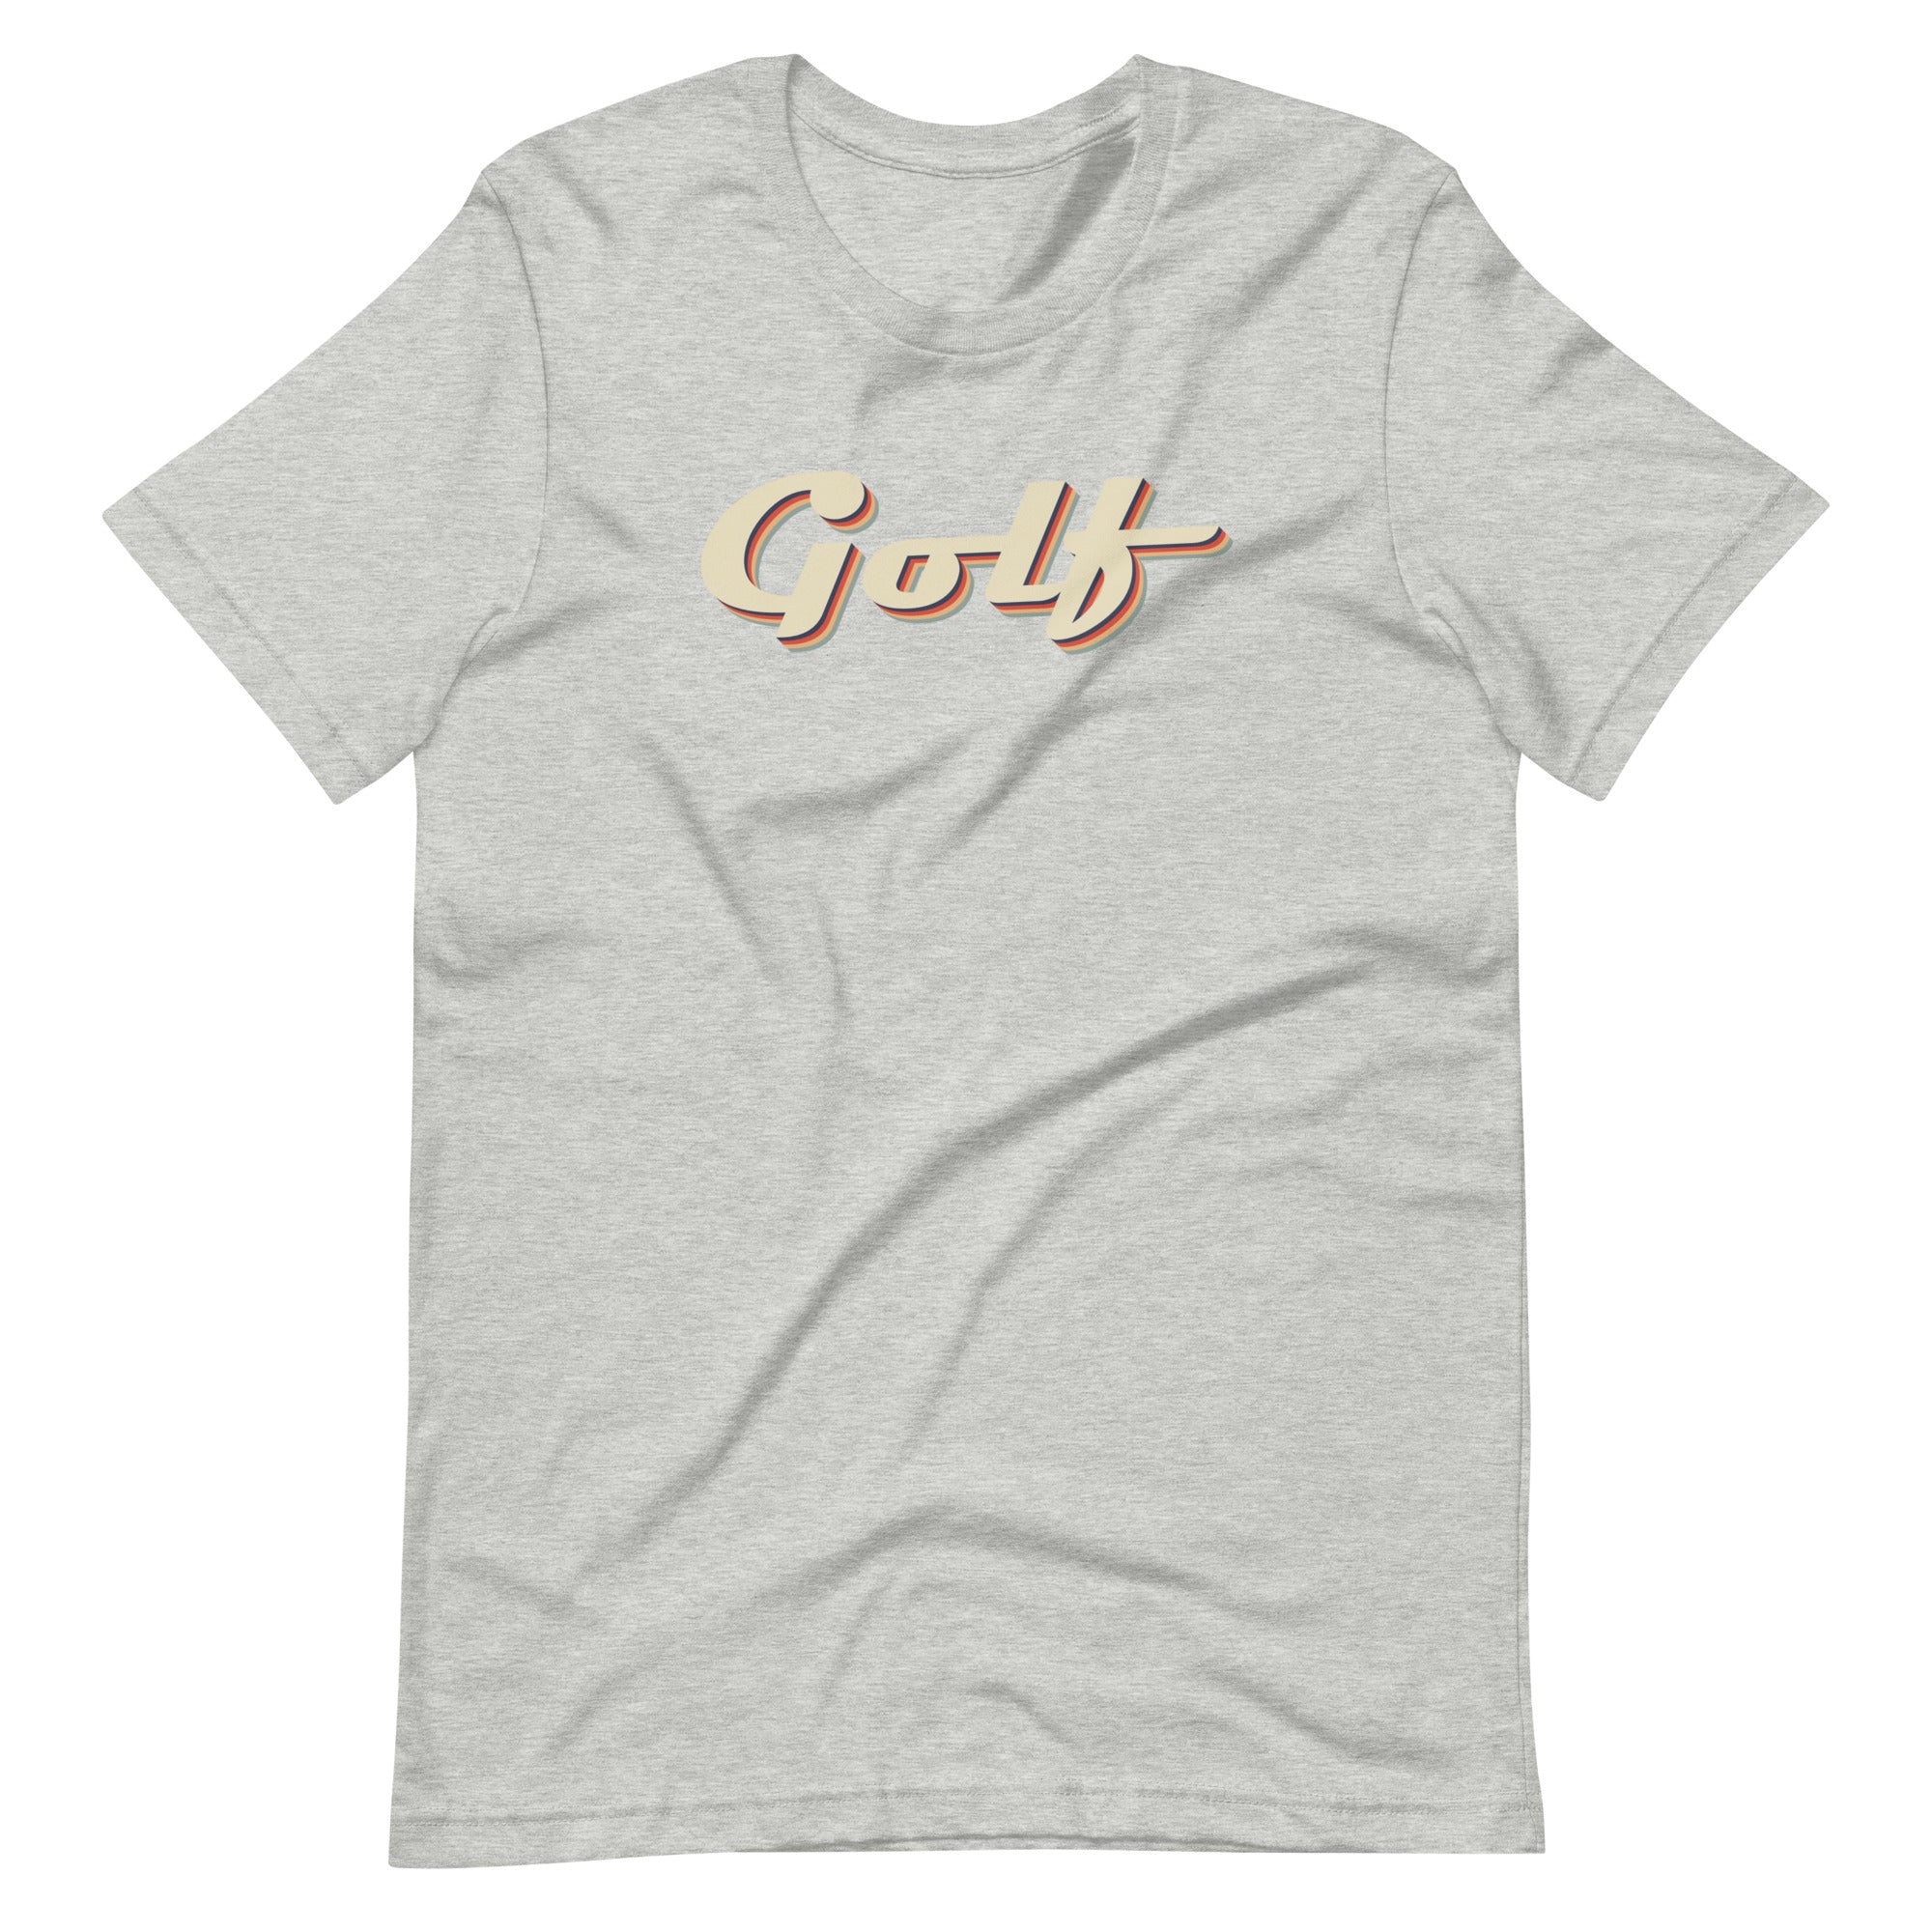  Super Golf Logo T-Shirt : Clothing, Shoes & Jewelry